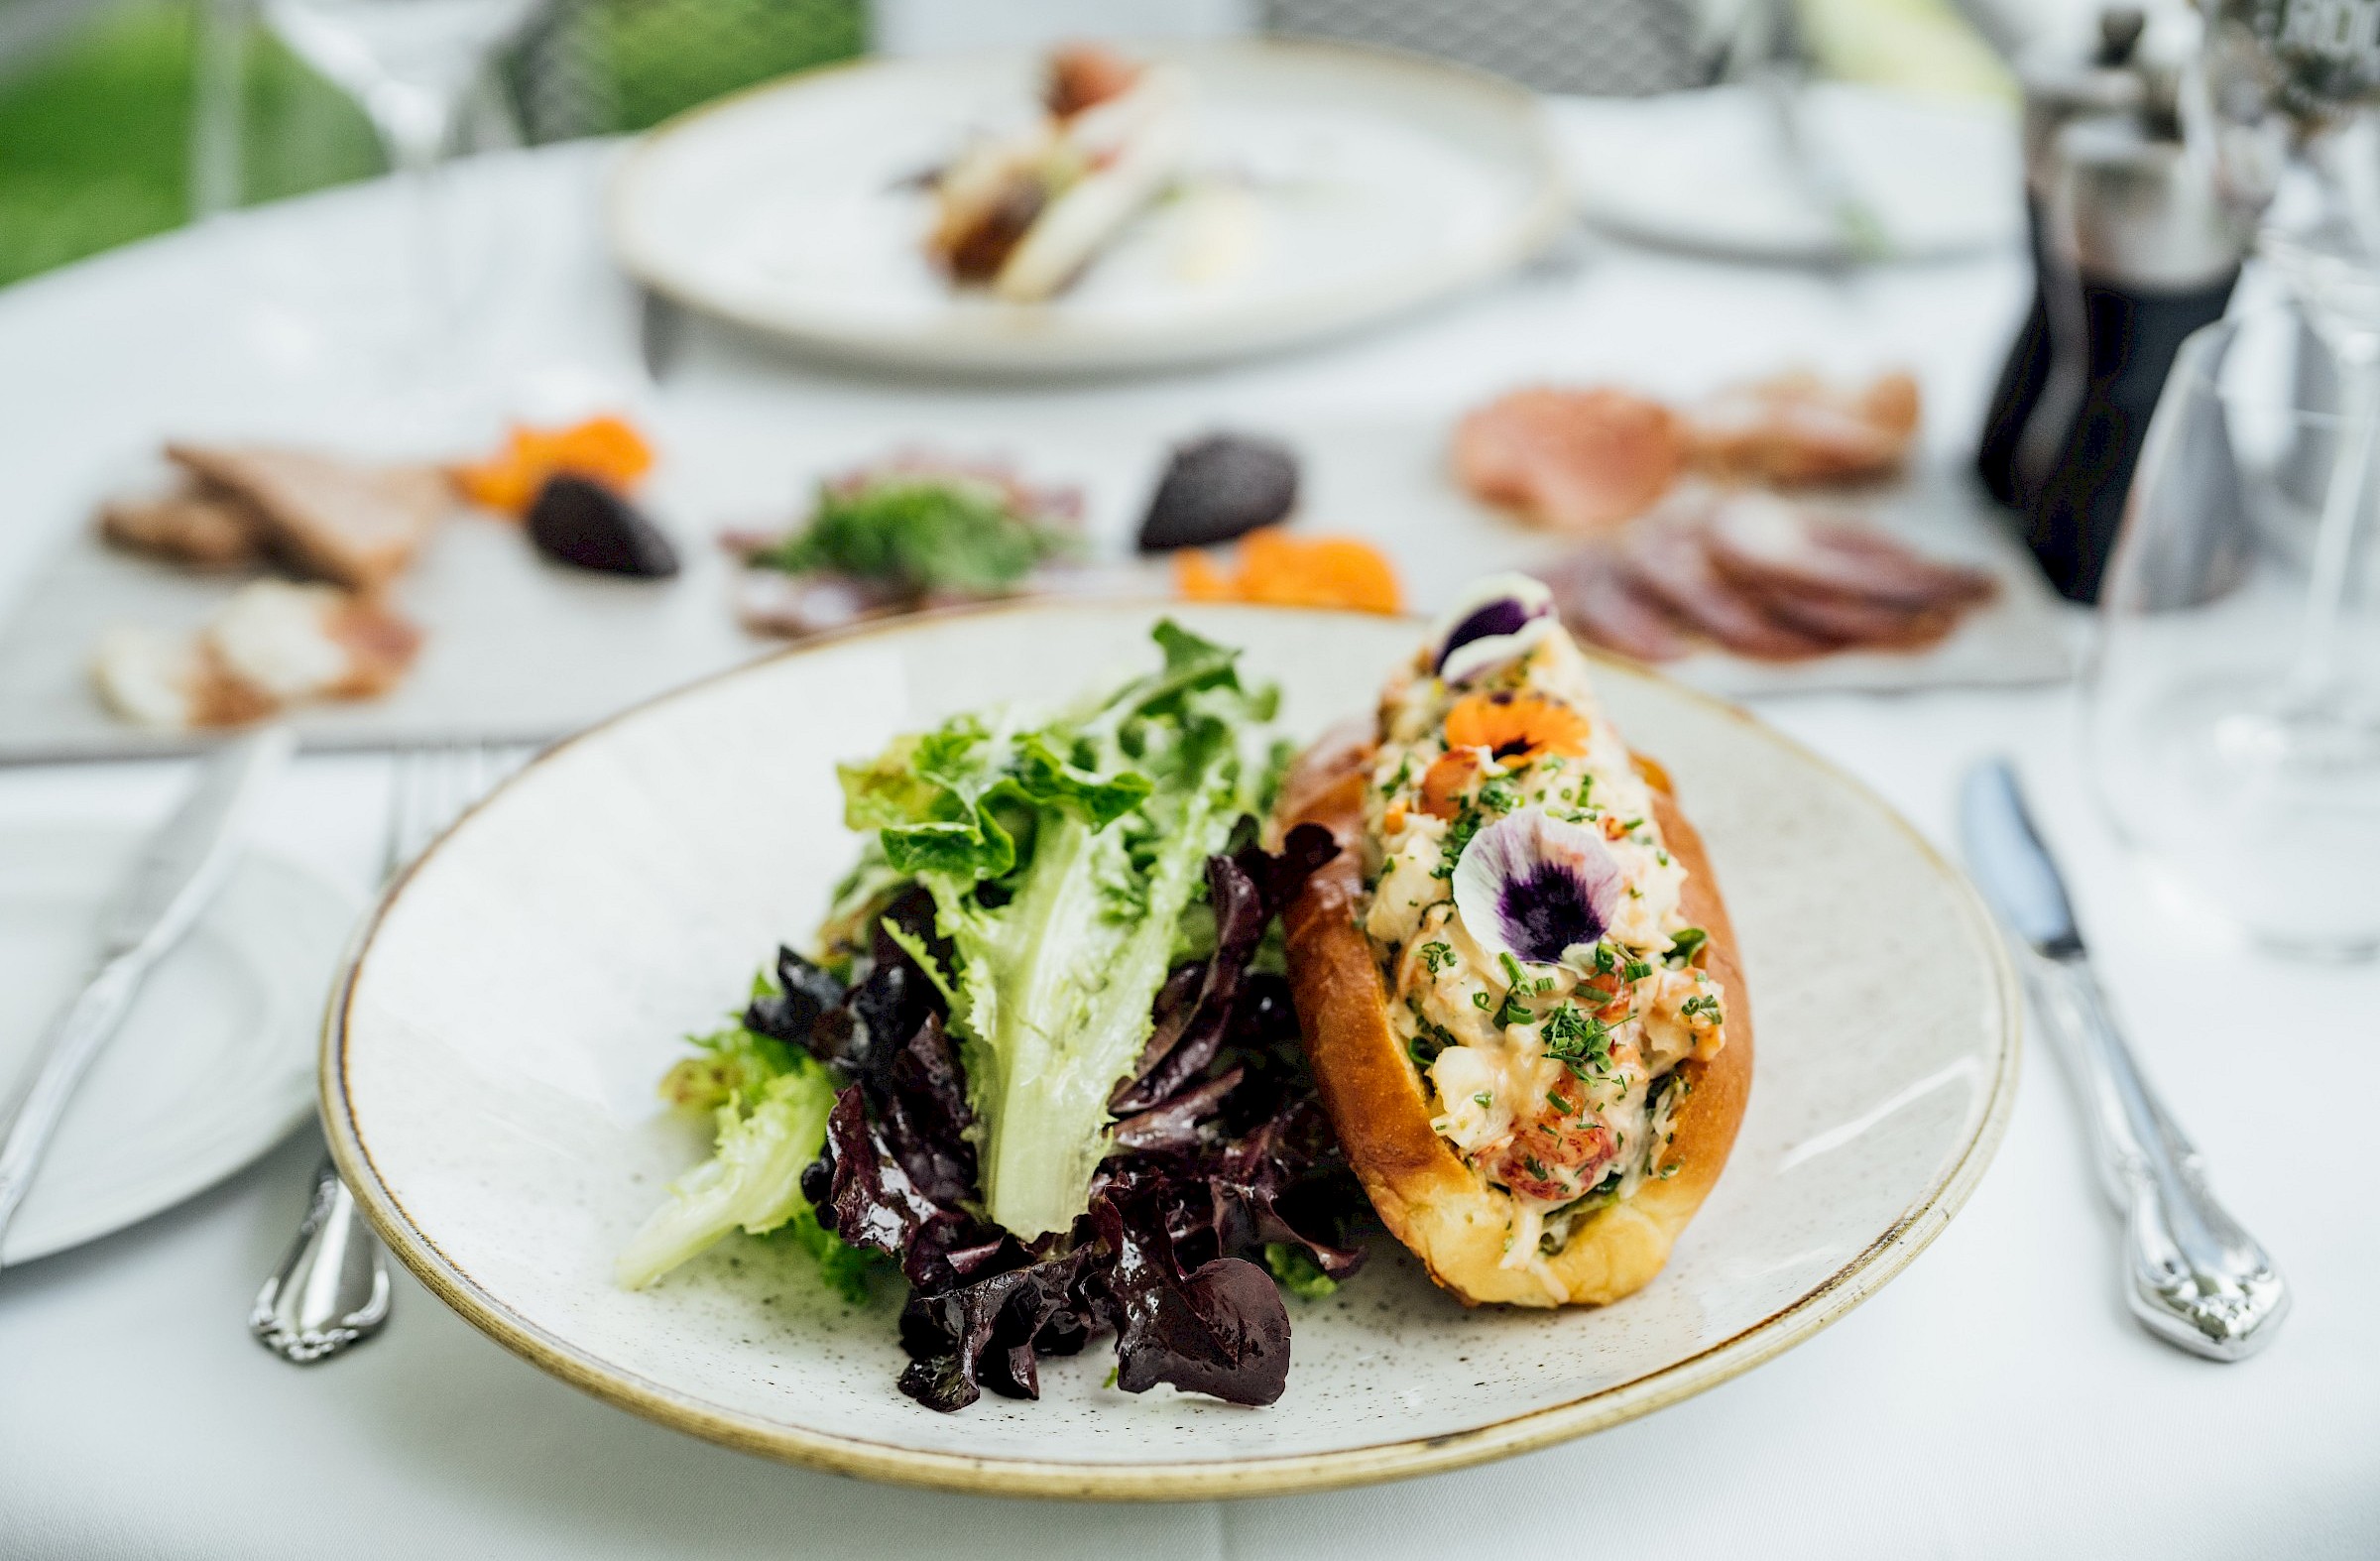 Lobster roll on a bistro terrace table